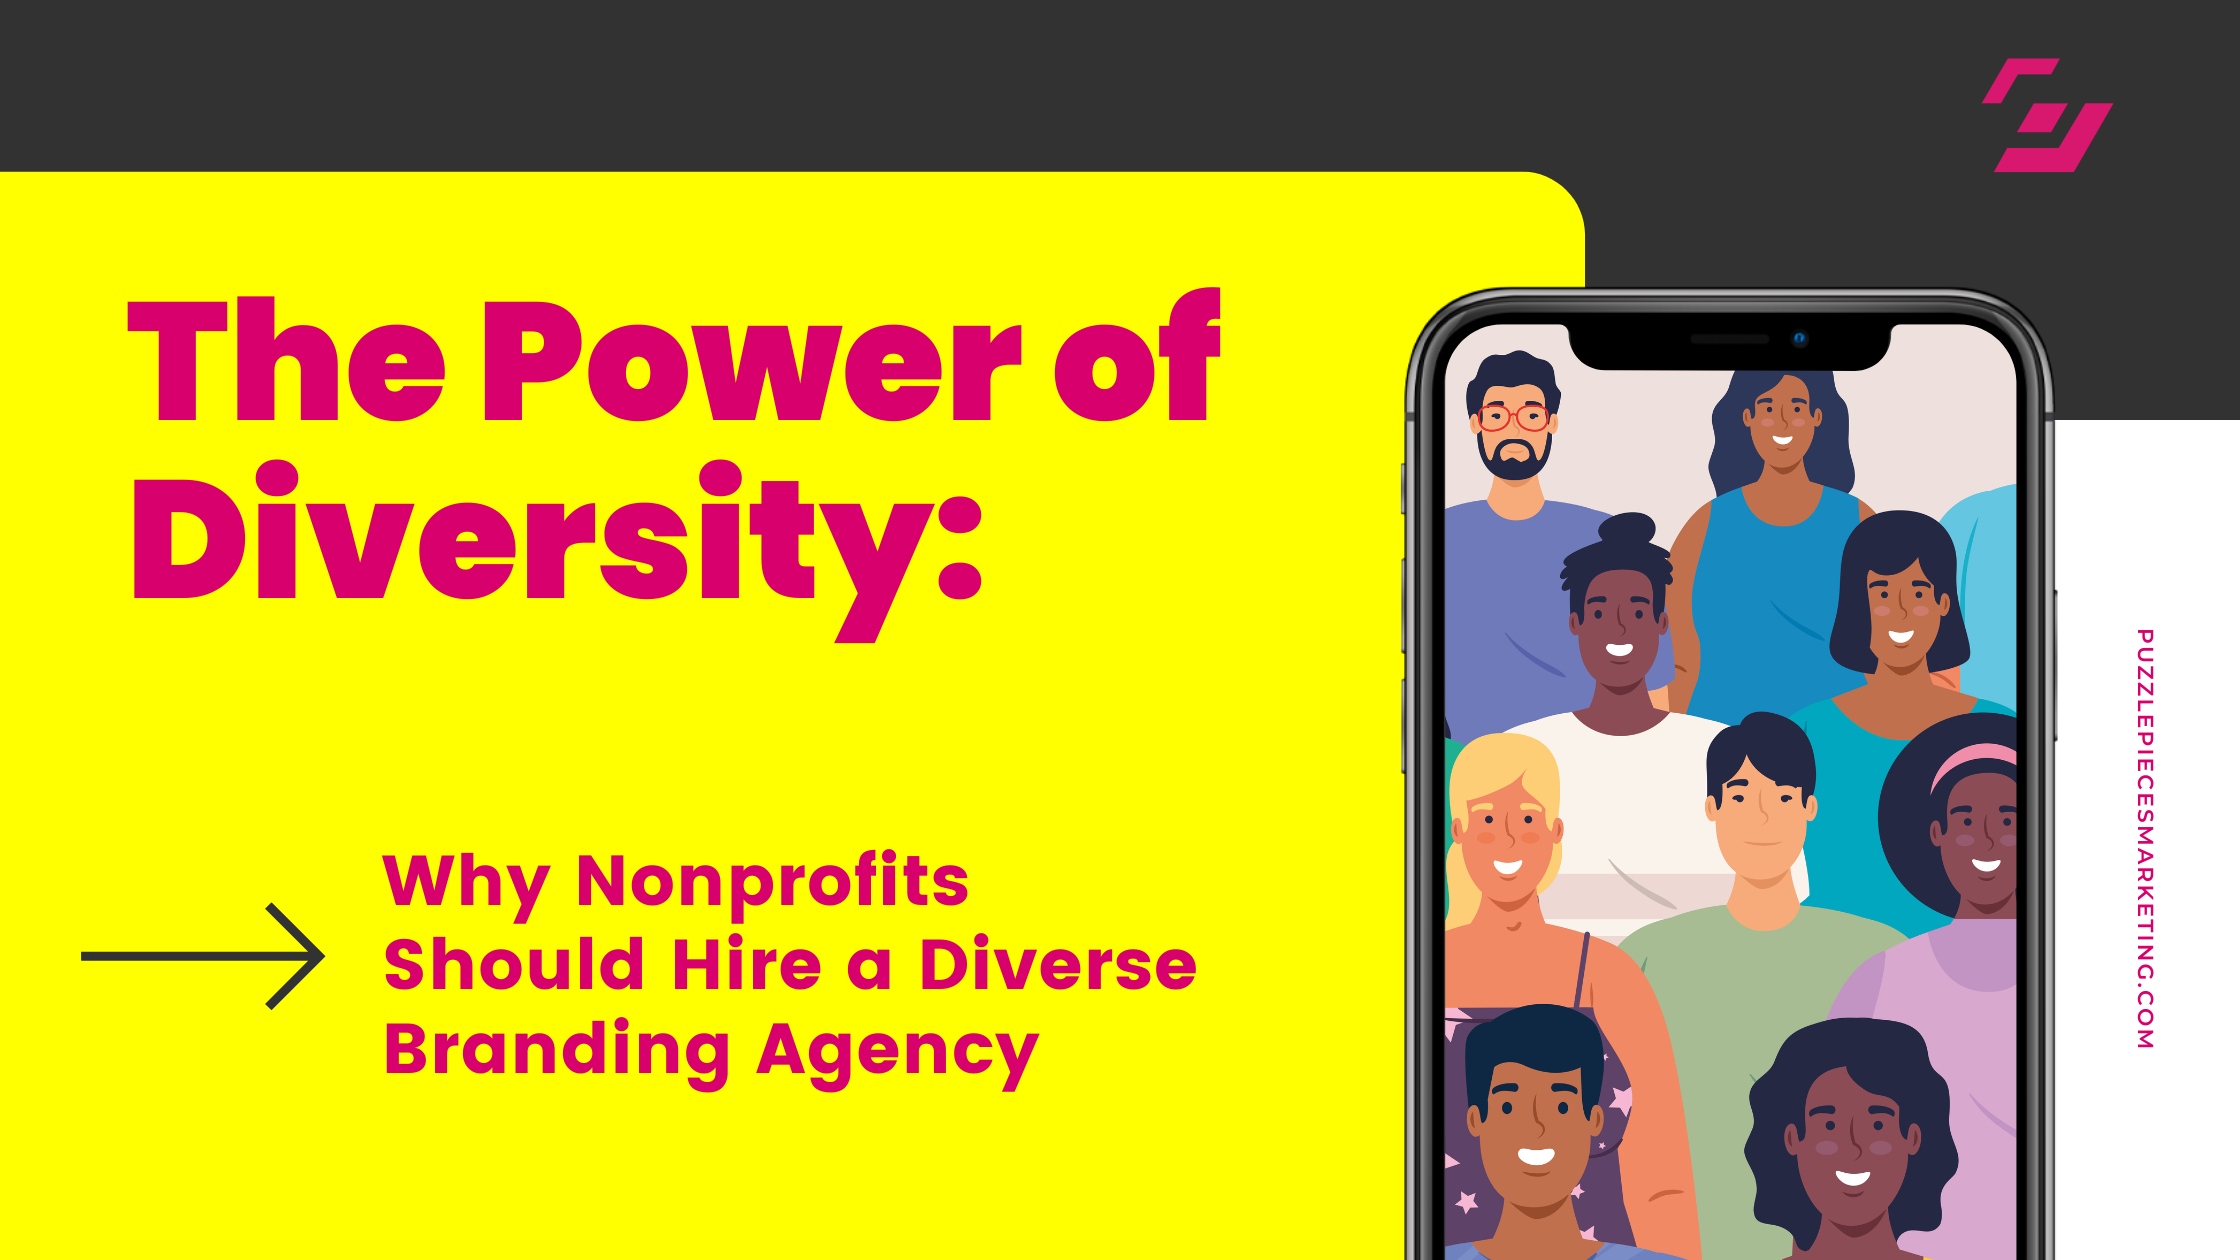 'The Power of Diversity: Why Nonprofits Should Hire a Diverse Branding Agency' written in hot pink on yellow background. Picture of diverse cartoons on iPhone